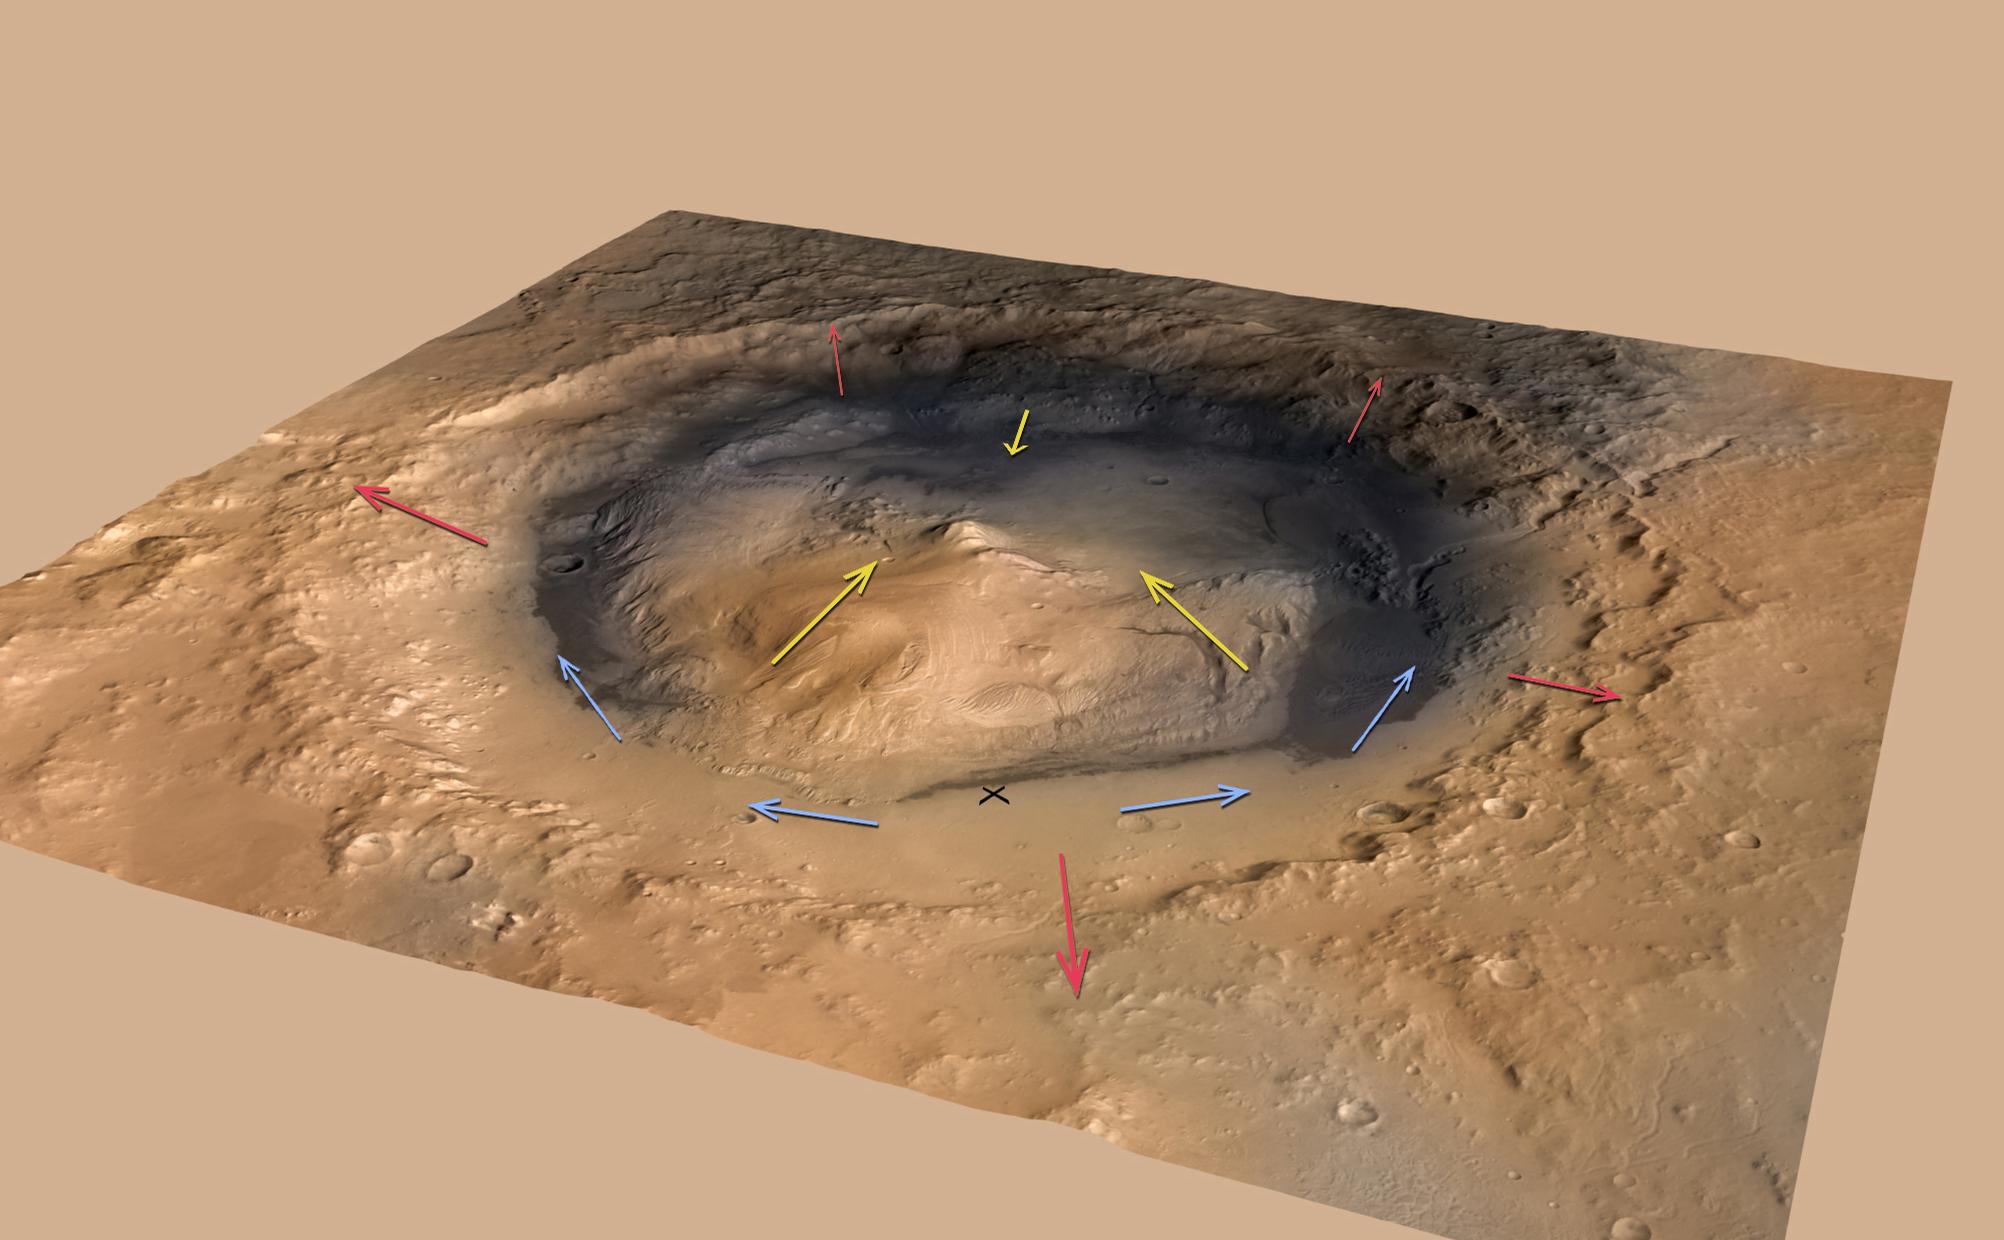 This graphic shows the pattern of winds predicted to be swirling around and inside Gale Crater, which is where NASA's Curiosity rover landed on Mars.